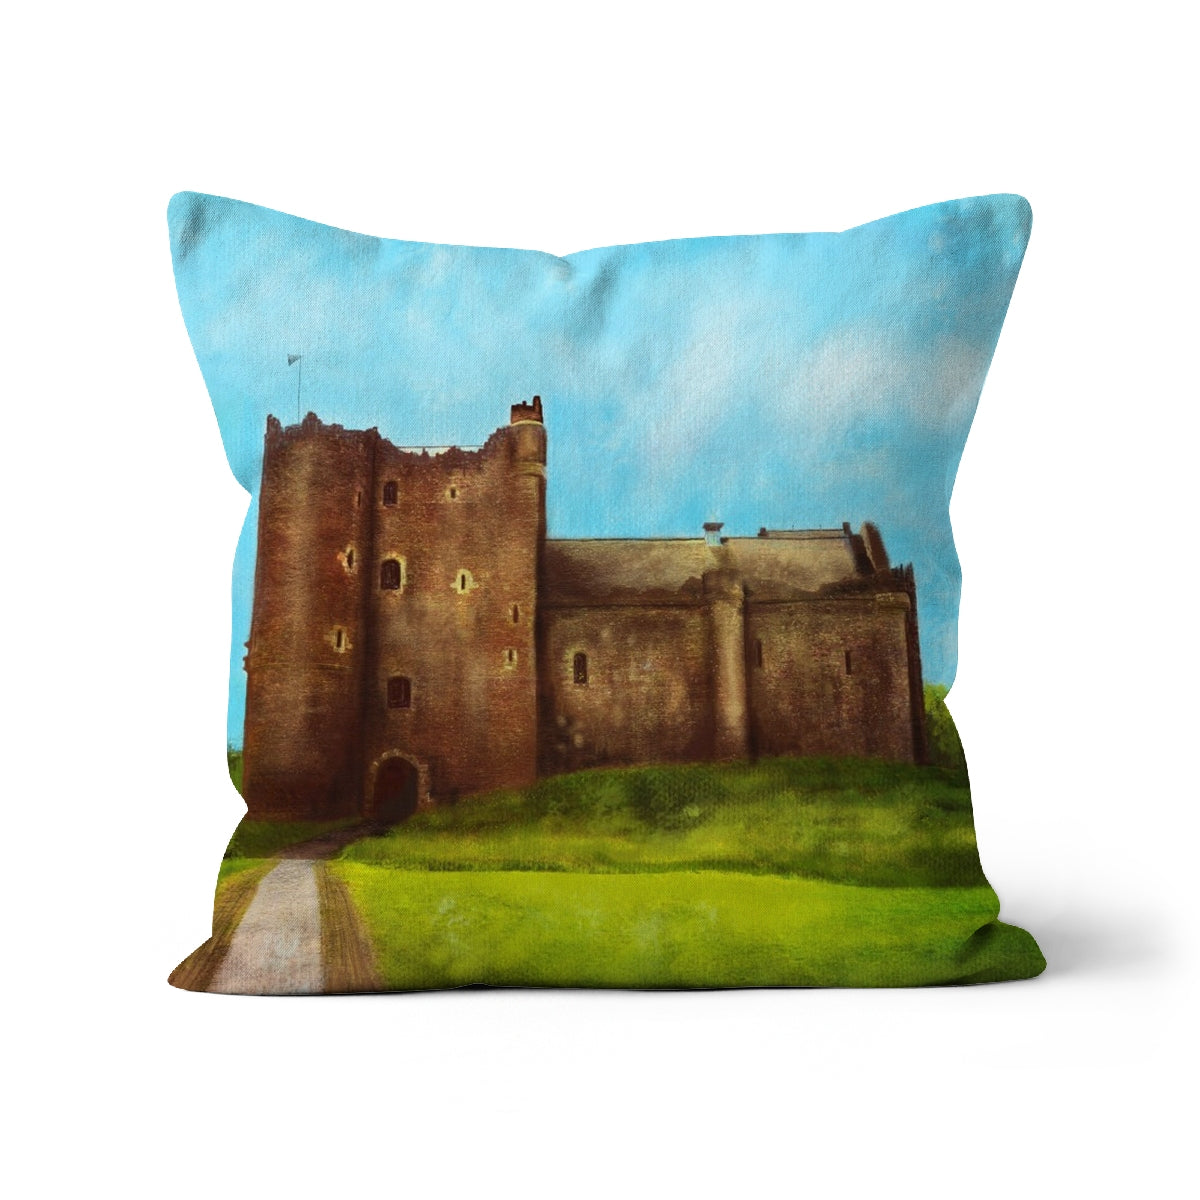 Doune Castle Art Gifts Cushion-Cushions-Historic & Iconic Scotland Art Gallery-Faux Suede-22"x22"-Paintings, Prints, Homeware, Art Gifts From Scotland By Scottish Artist Kevin Hunter